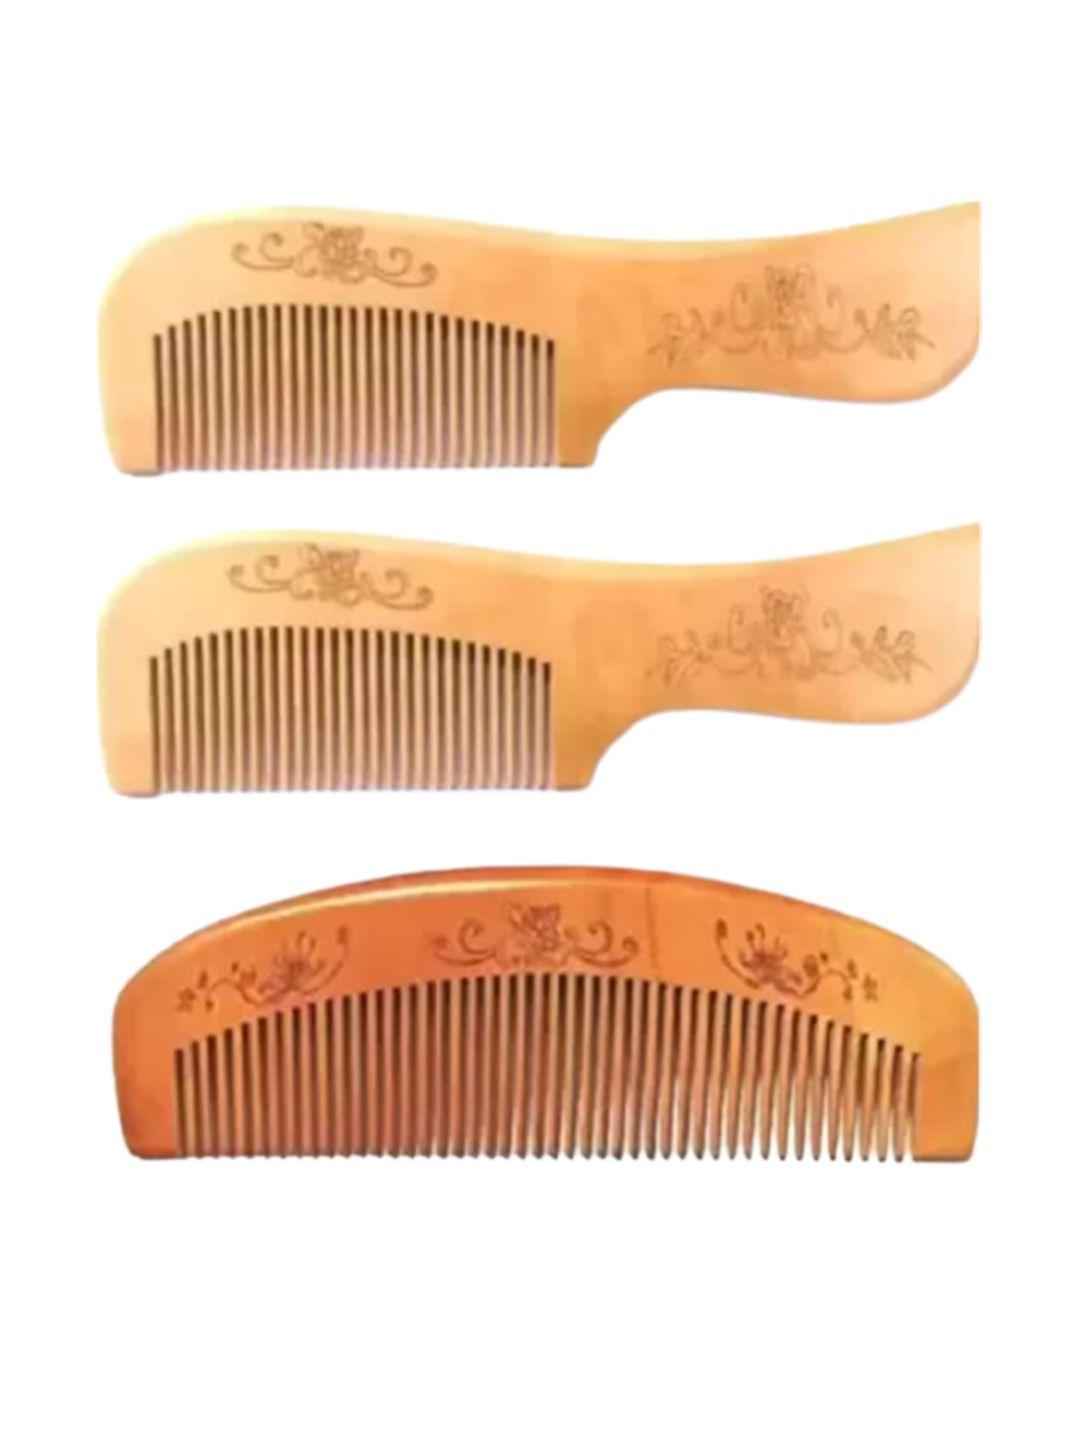 feelhigh set of 3 anti-dandruff wooden combs to promote hair growth - brown